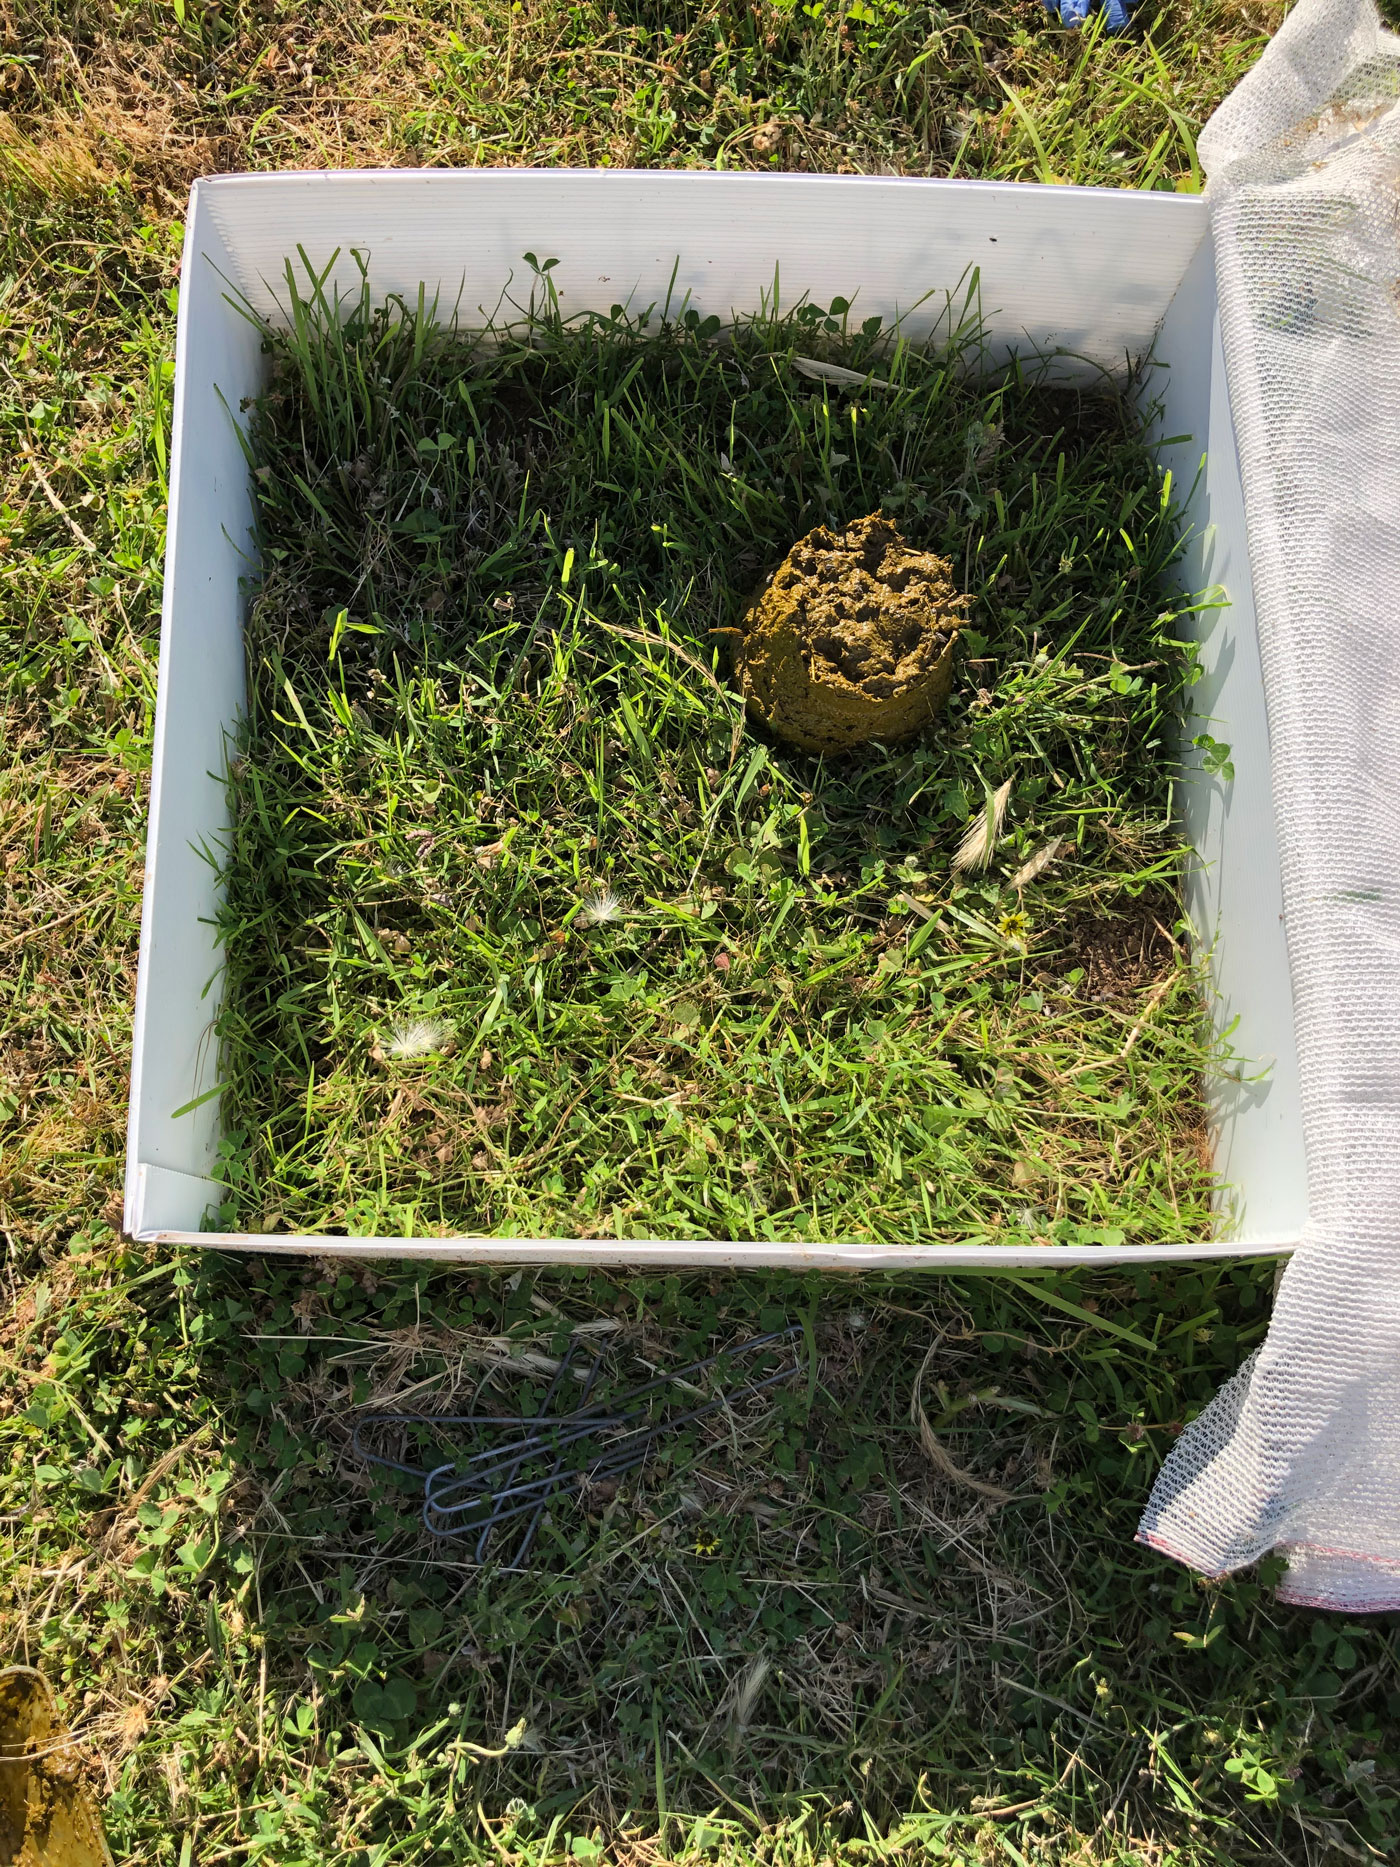 Fig. 2. Fresh cattle dung added to the appropriate mesocosm unit